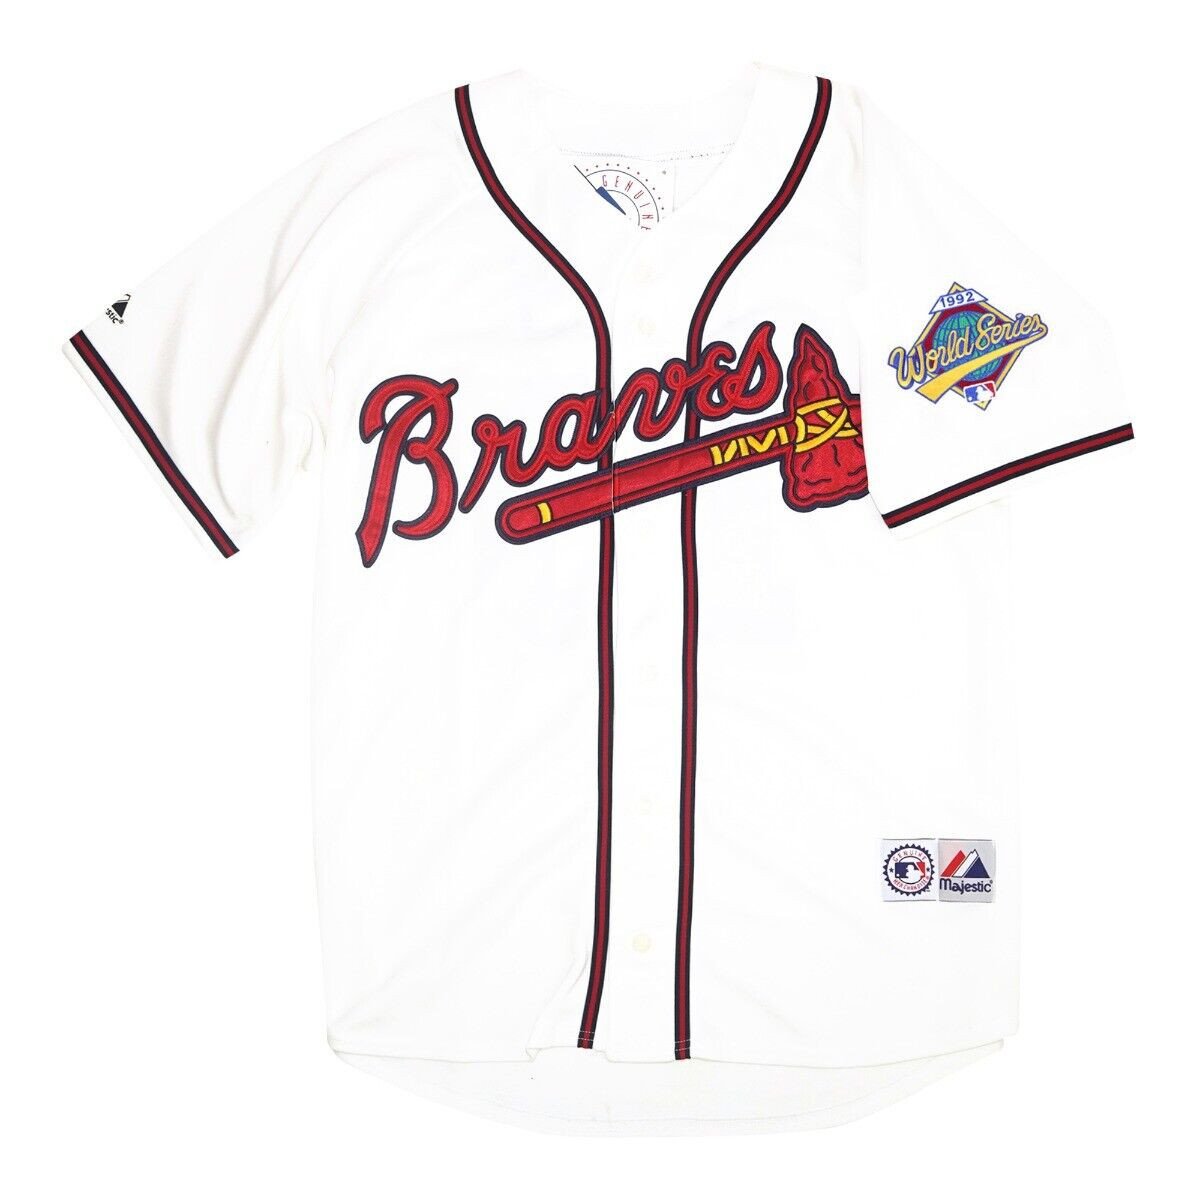 braves jersey youth large